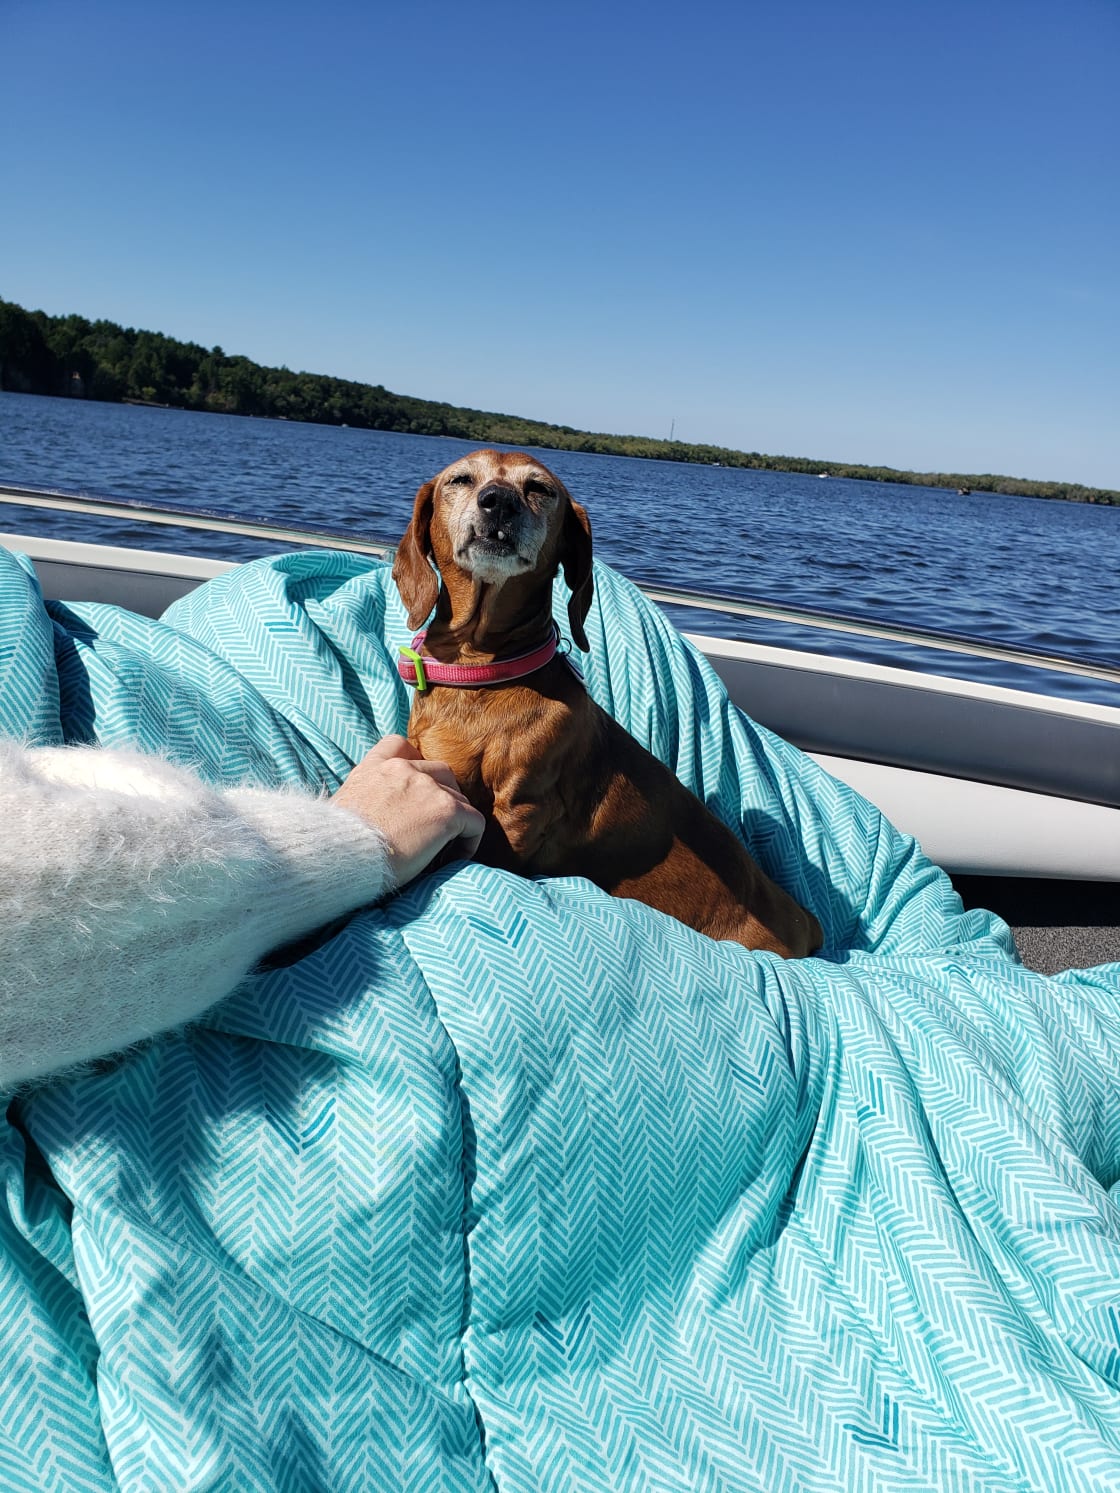 Our other dog soaking up the sun on the boat!